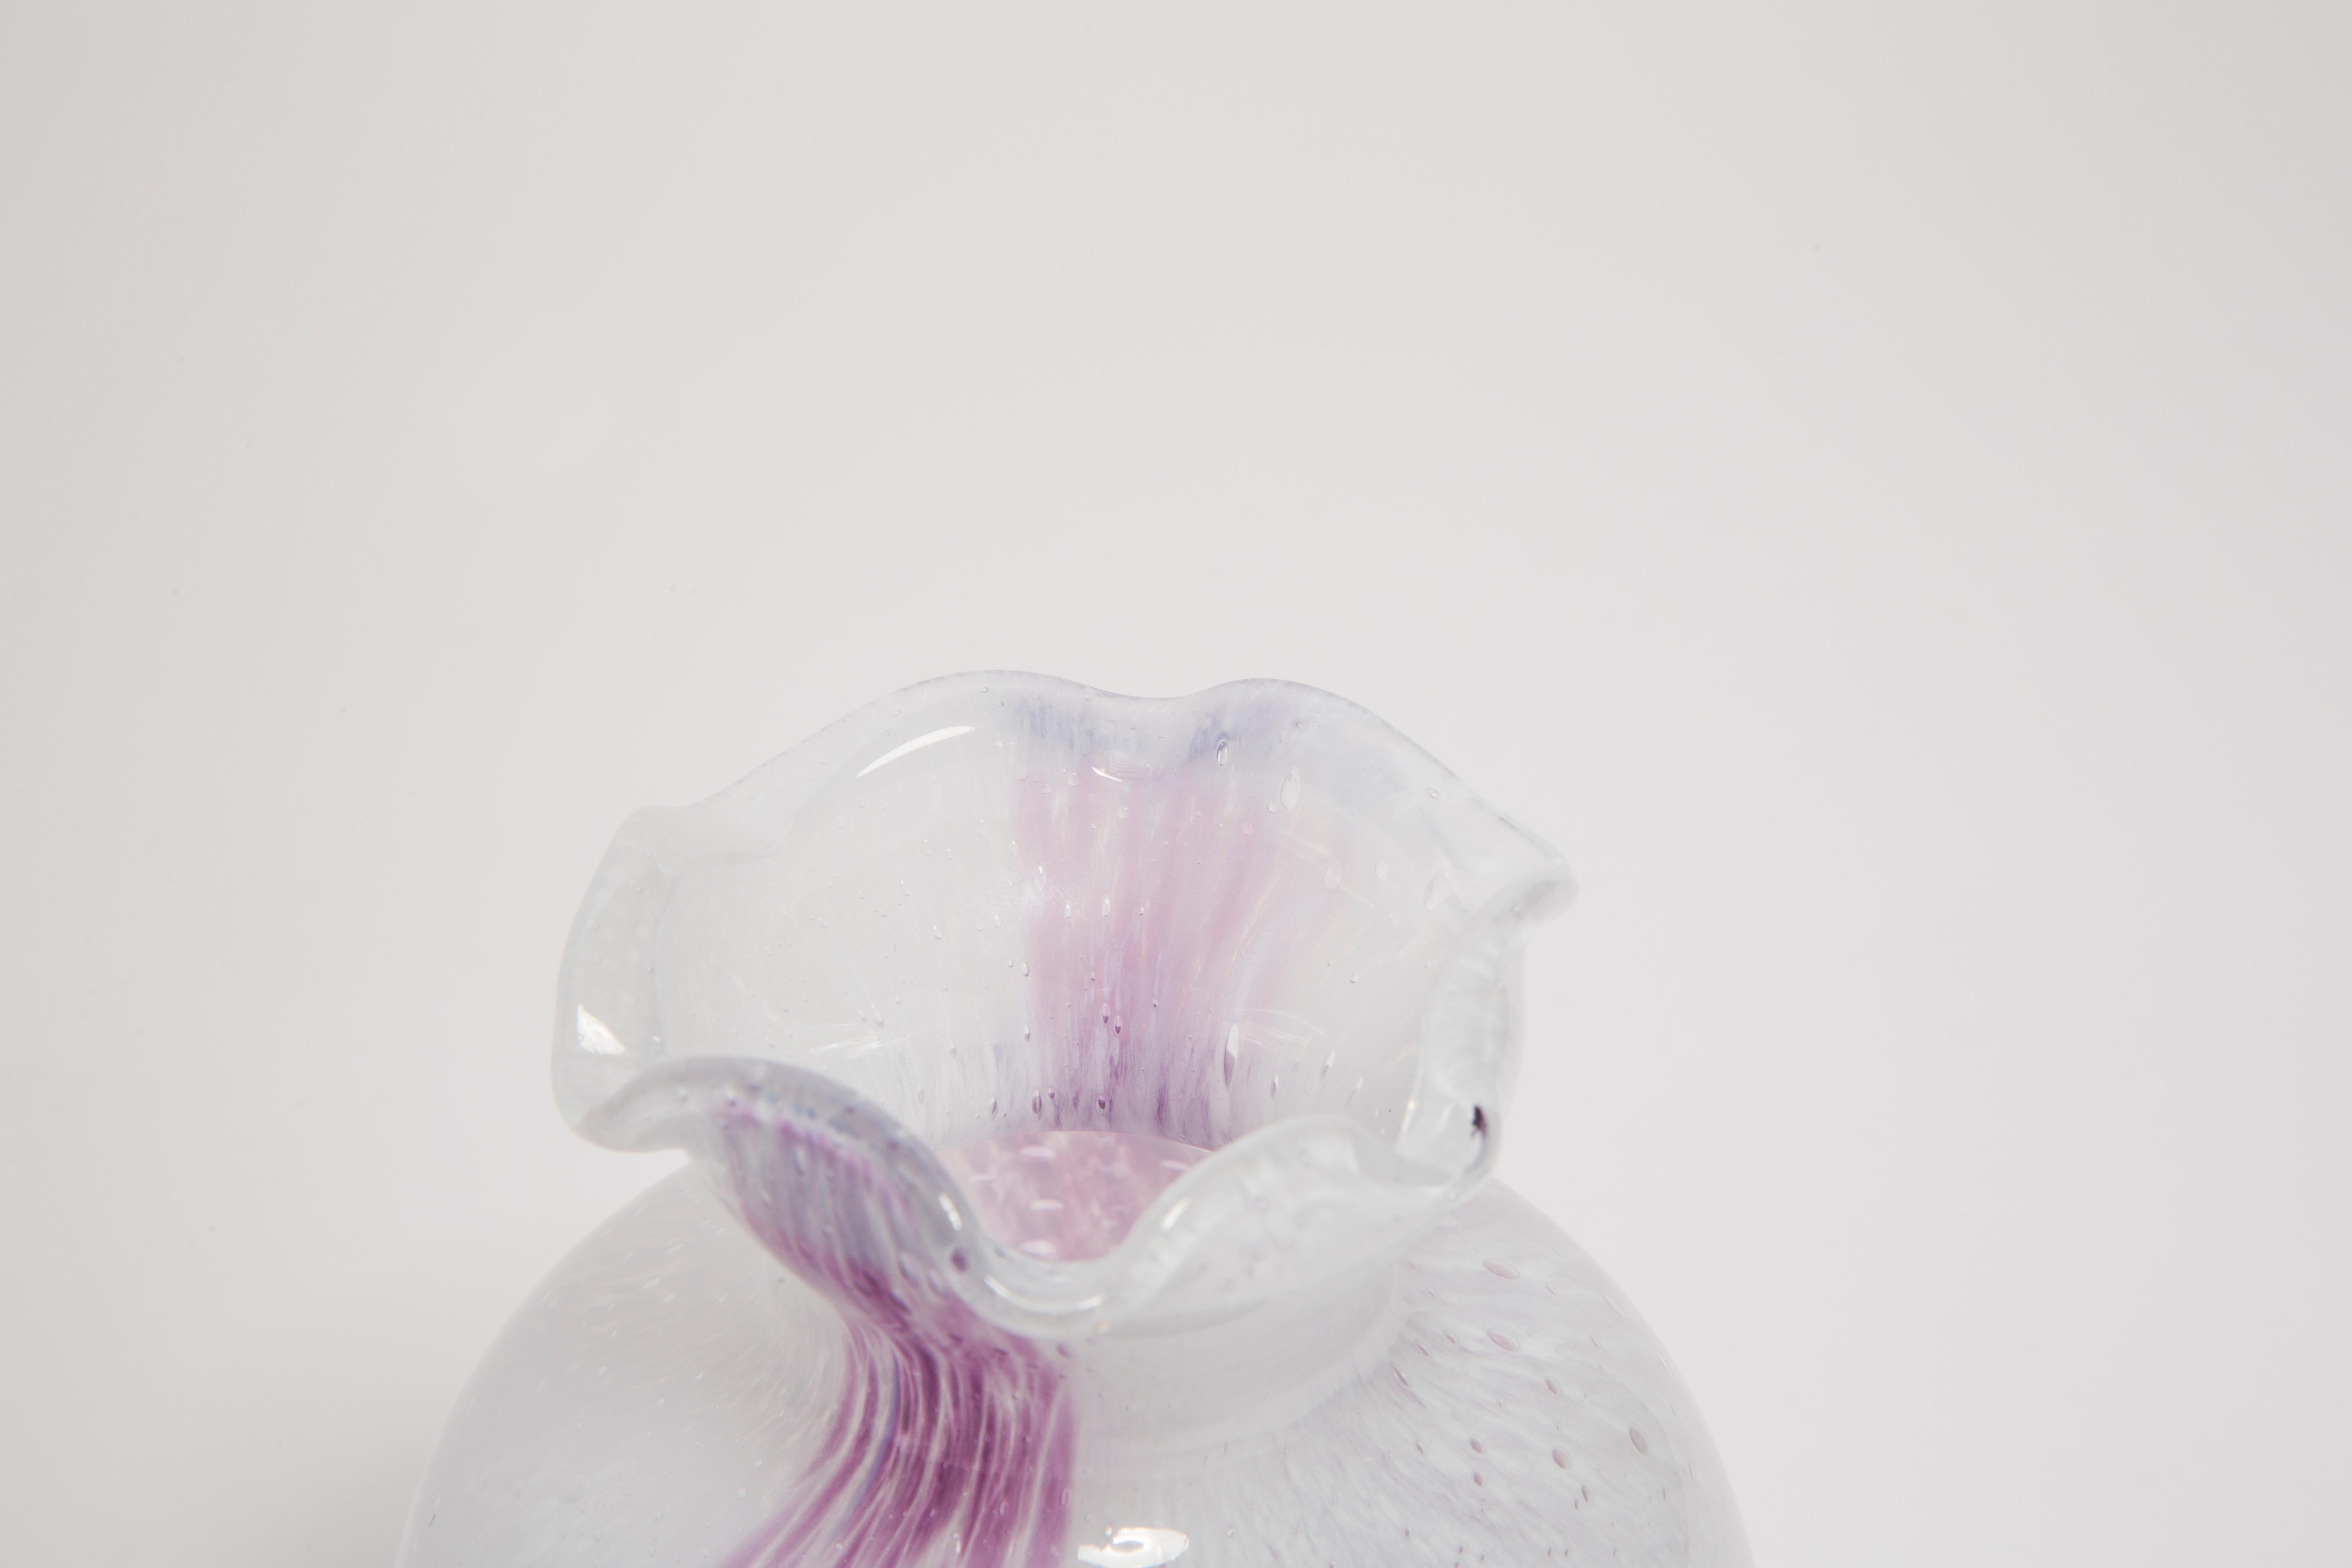 Mid Century Vintage White and Purple Small Murano Vase, Italy, 1960s For Sale 6